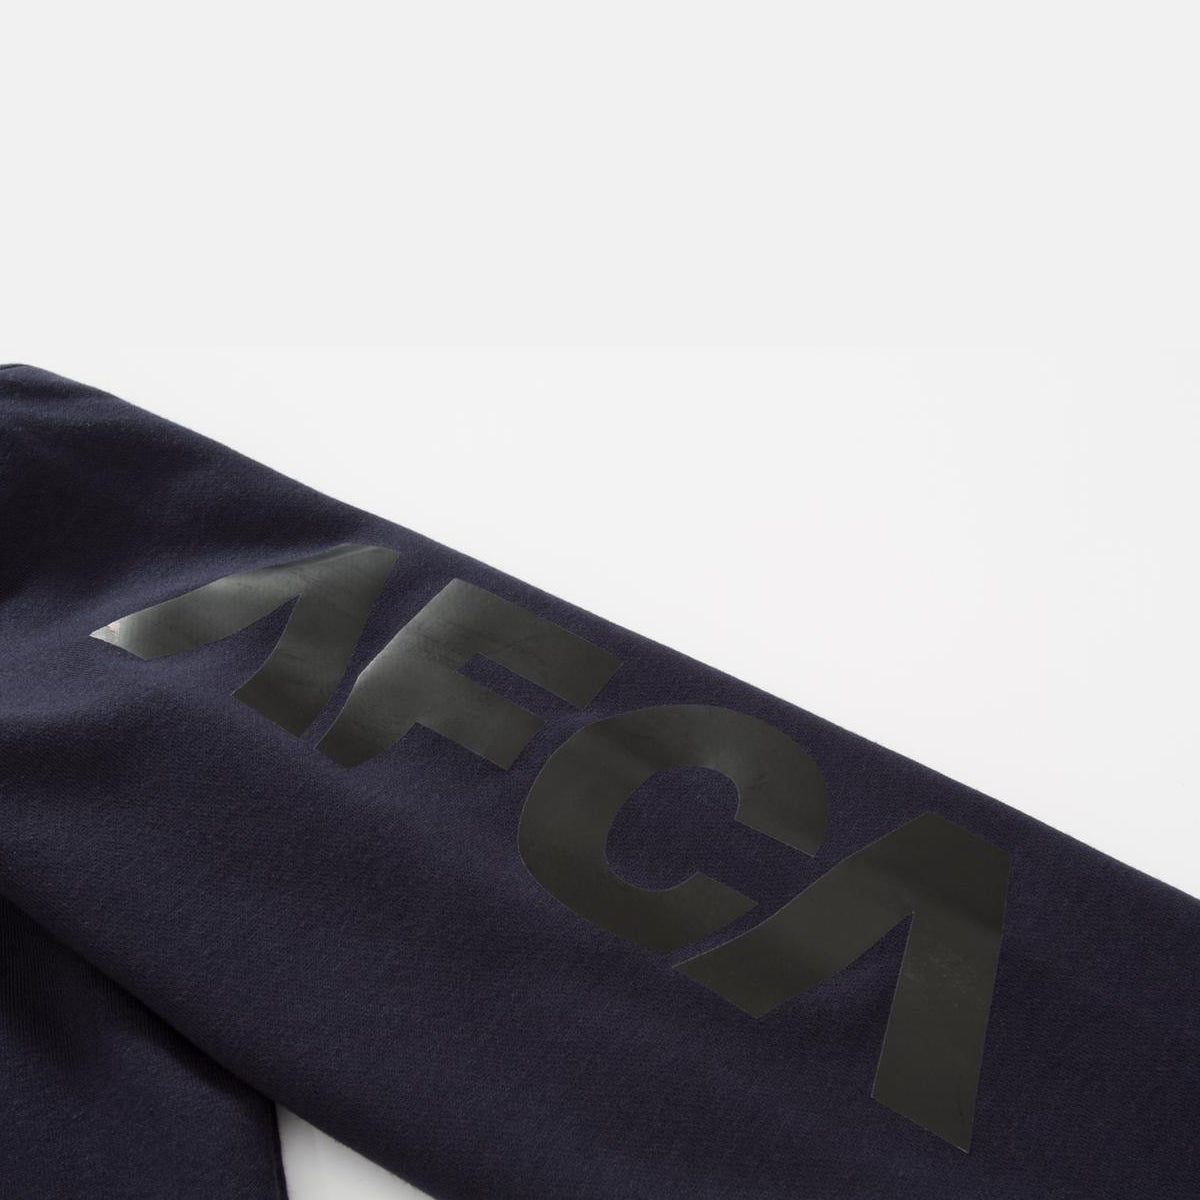 AFCA sweater Navy lifestyle